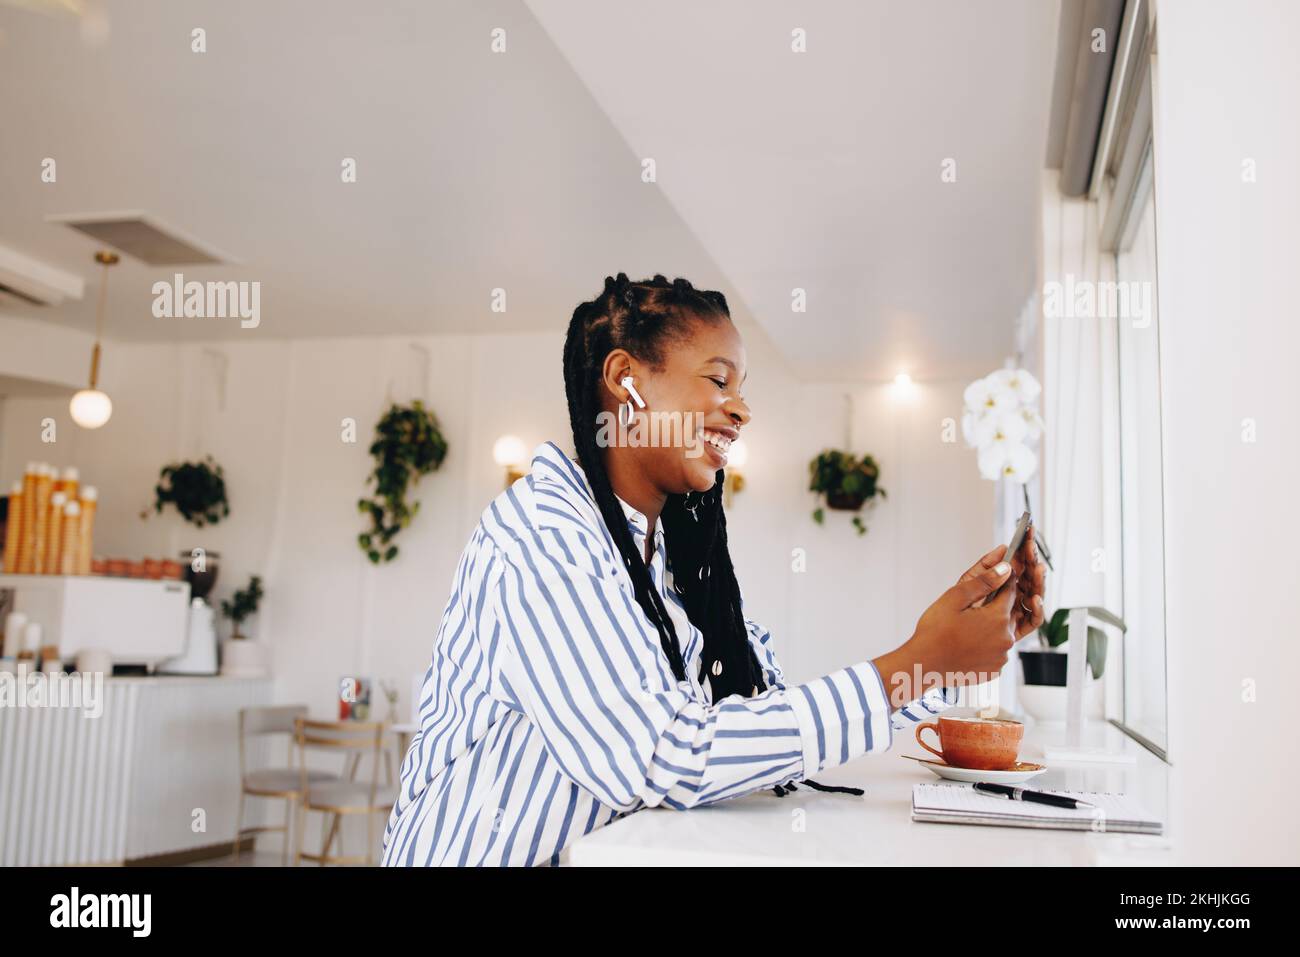 Cheerful black businesswoman having a video call on a smartphone while working in a cafe. Happy young businesswoman smiling while video chatting with Stock Photo